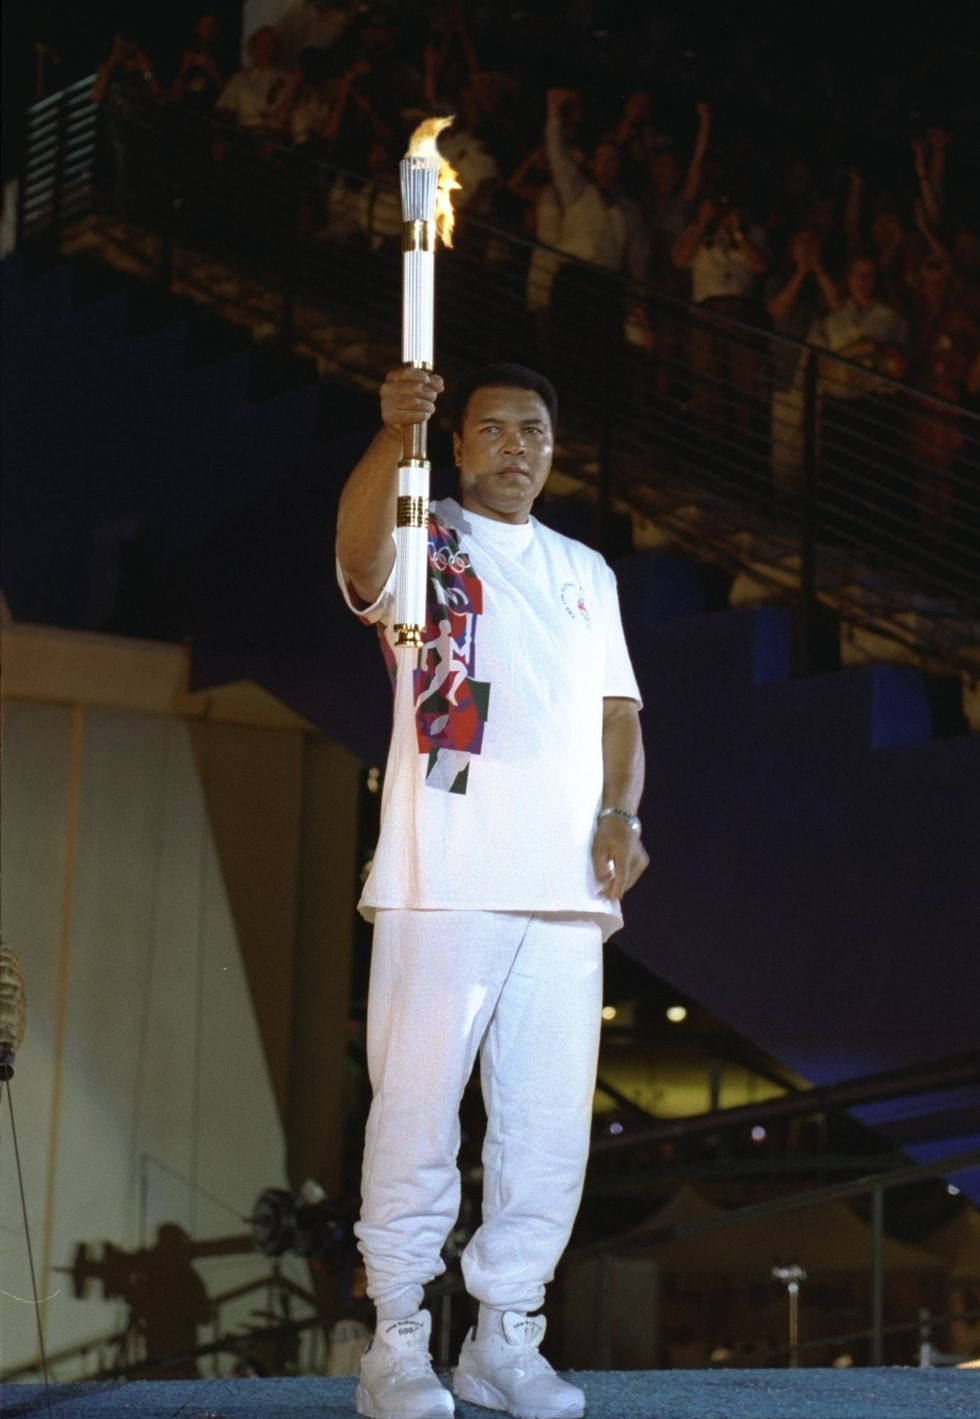 muhammad ali holds the olympic torch at the 1996 olympic games opening ceremony